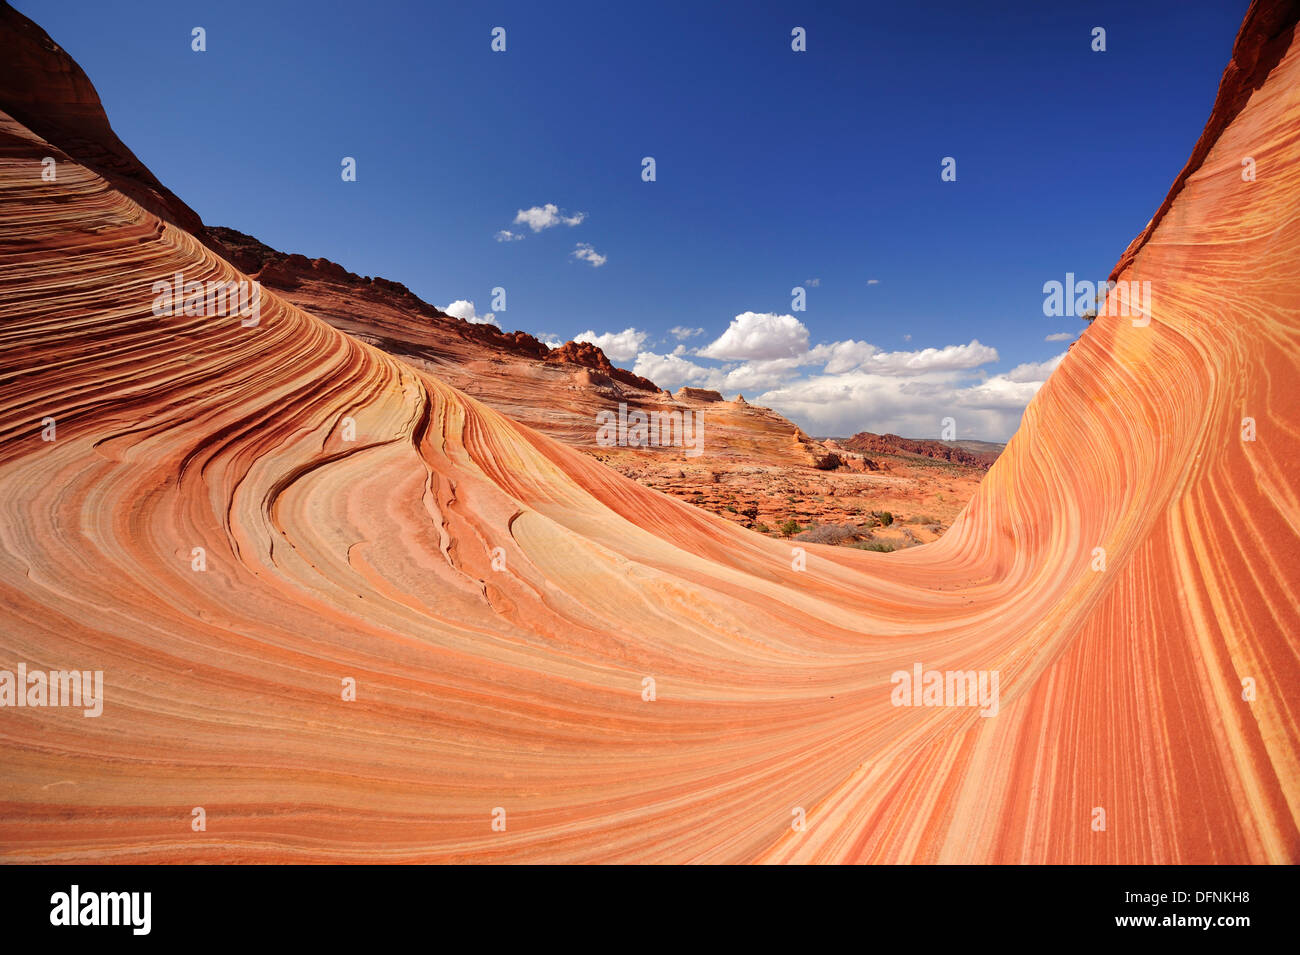 Red sandstone formation, The Wave, Coyote Buttes, Paria Canyon, Vermilion Cliffs National Monument, Arizona, Southwest, USA, Ame Stock Photo